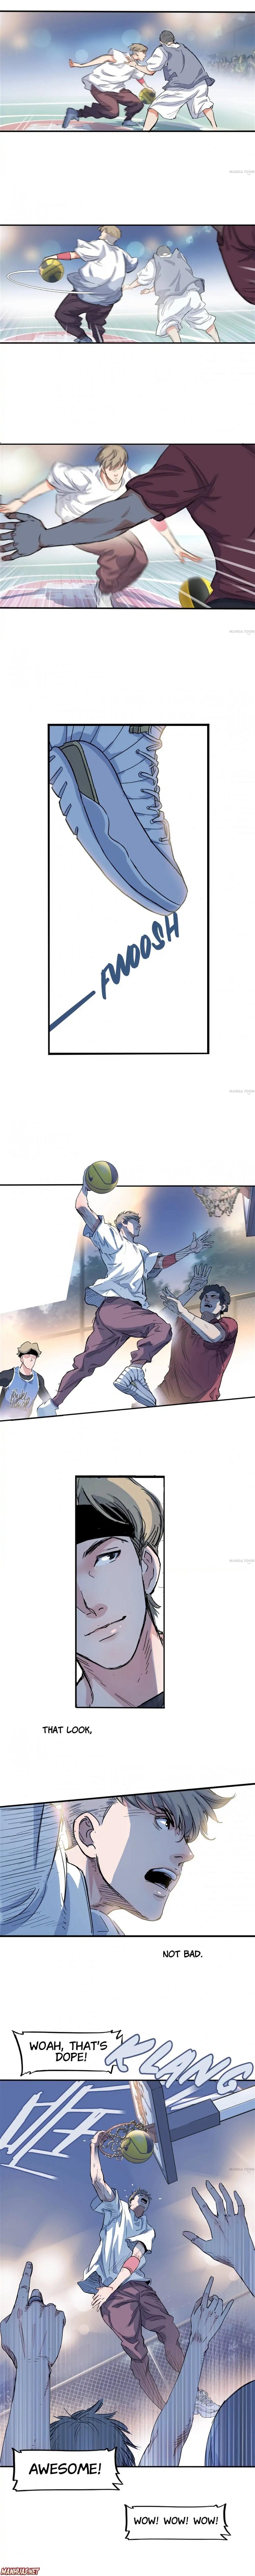 Streetball in the Hood Chapter 11 - Page 4